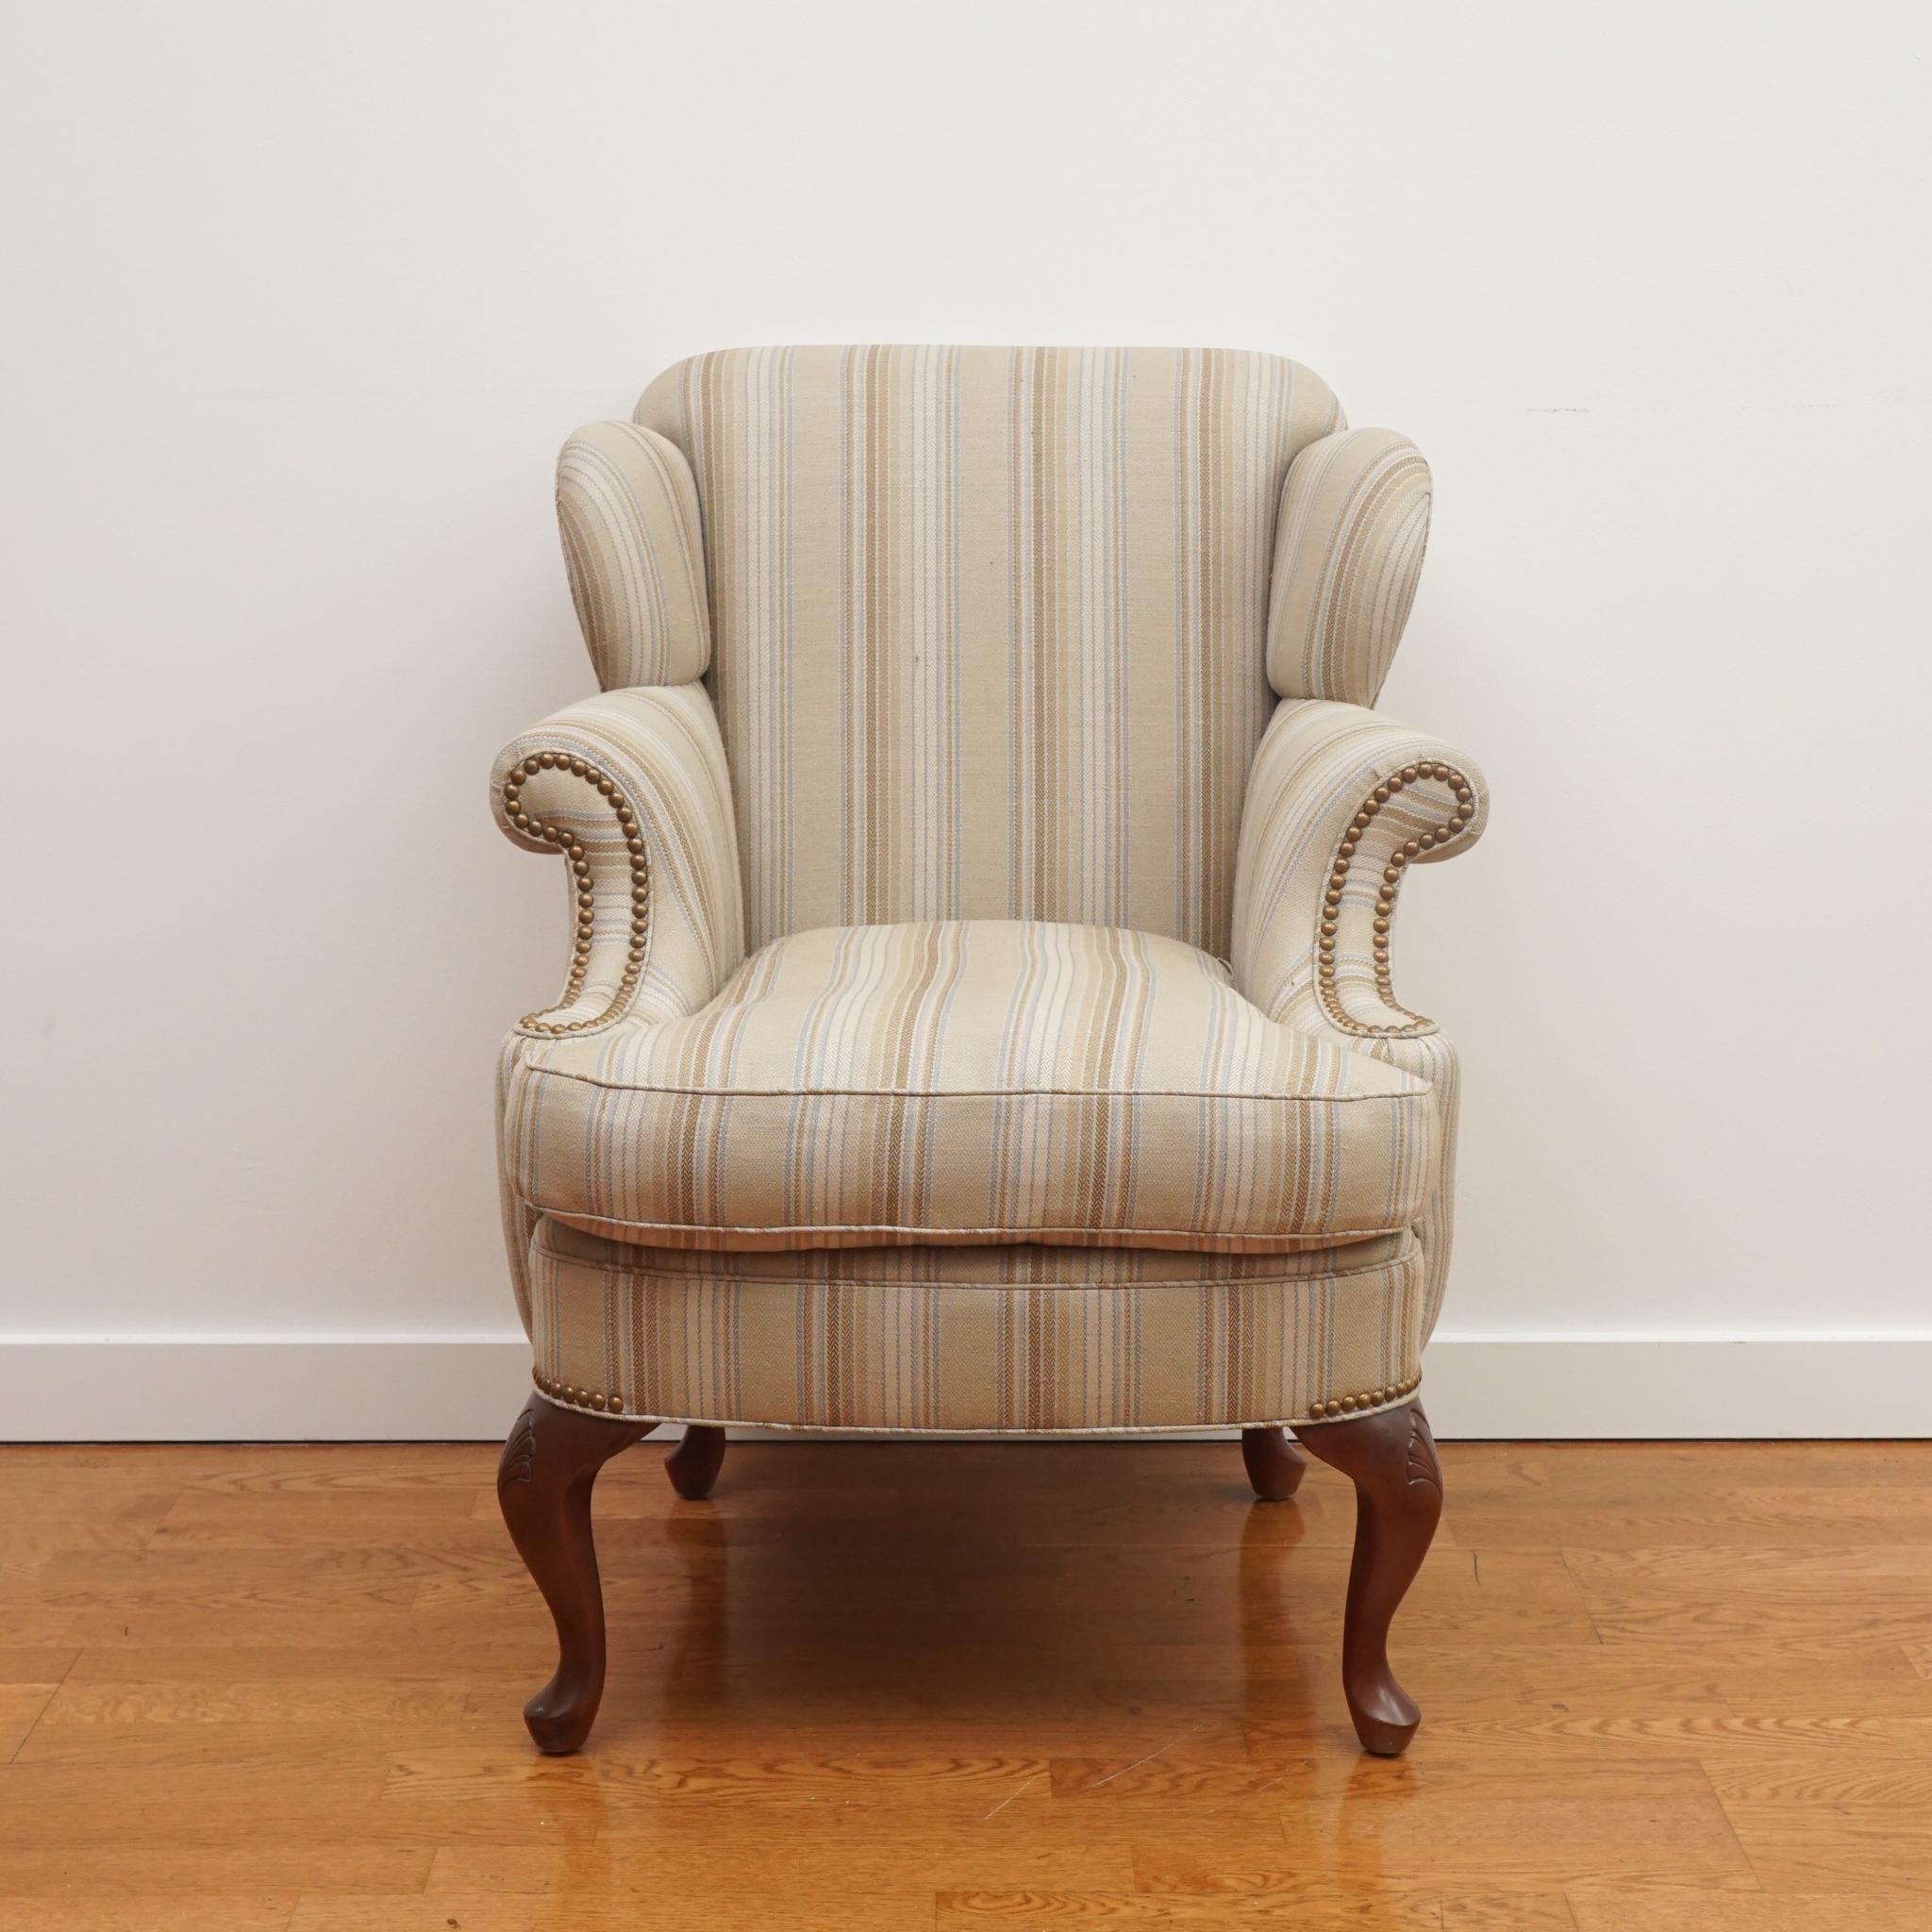 The petite Queen Anne-style wing chair, shown here, is desirable for both its scale and graceful style. Upholstered in a traditional multi-stripe fabric, the chair features carved cabriole legs in walnut finish and brass nail head detailing. The